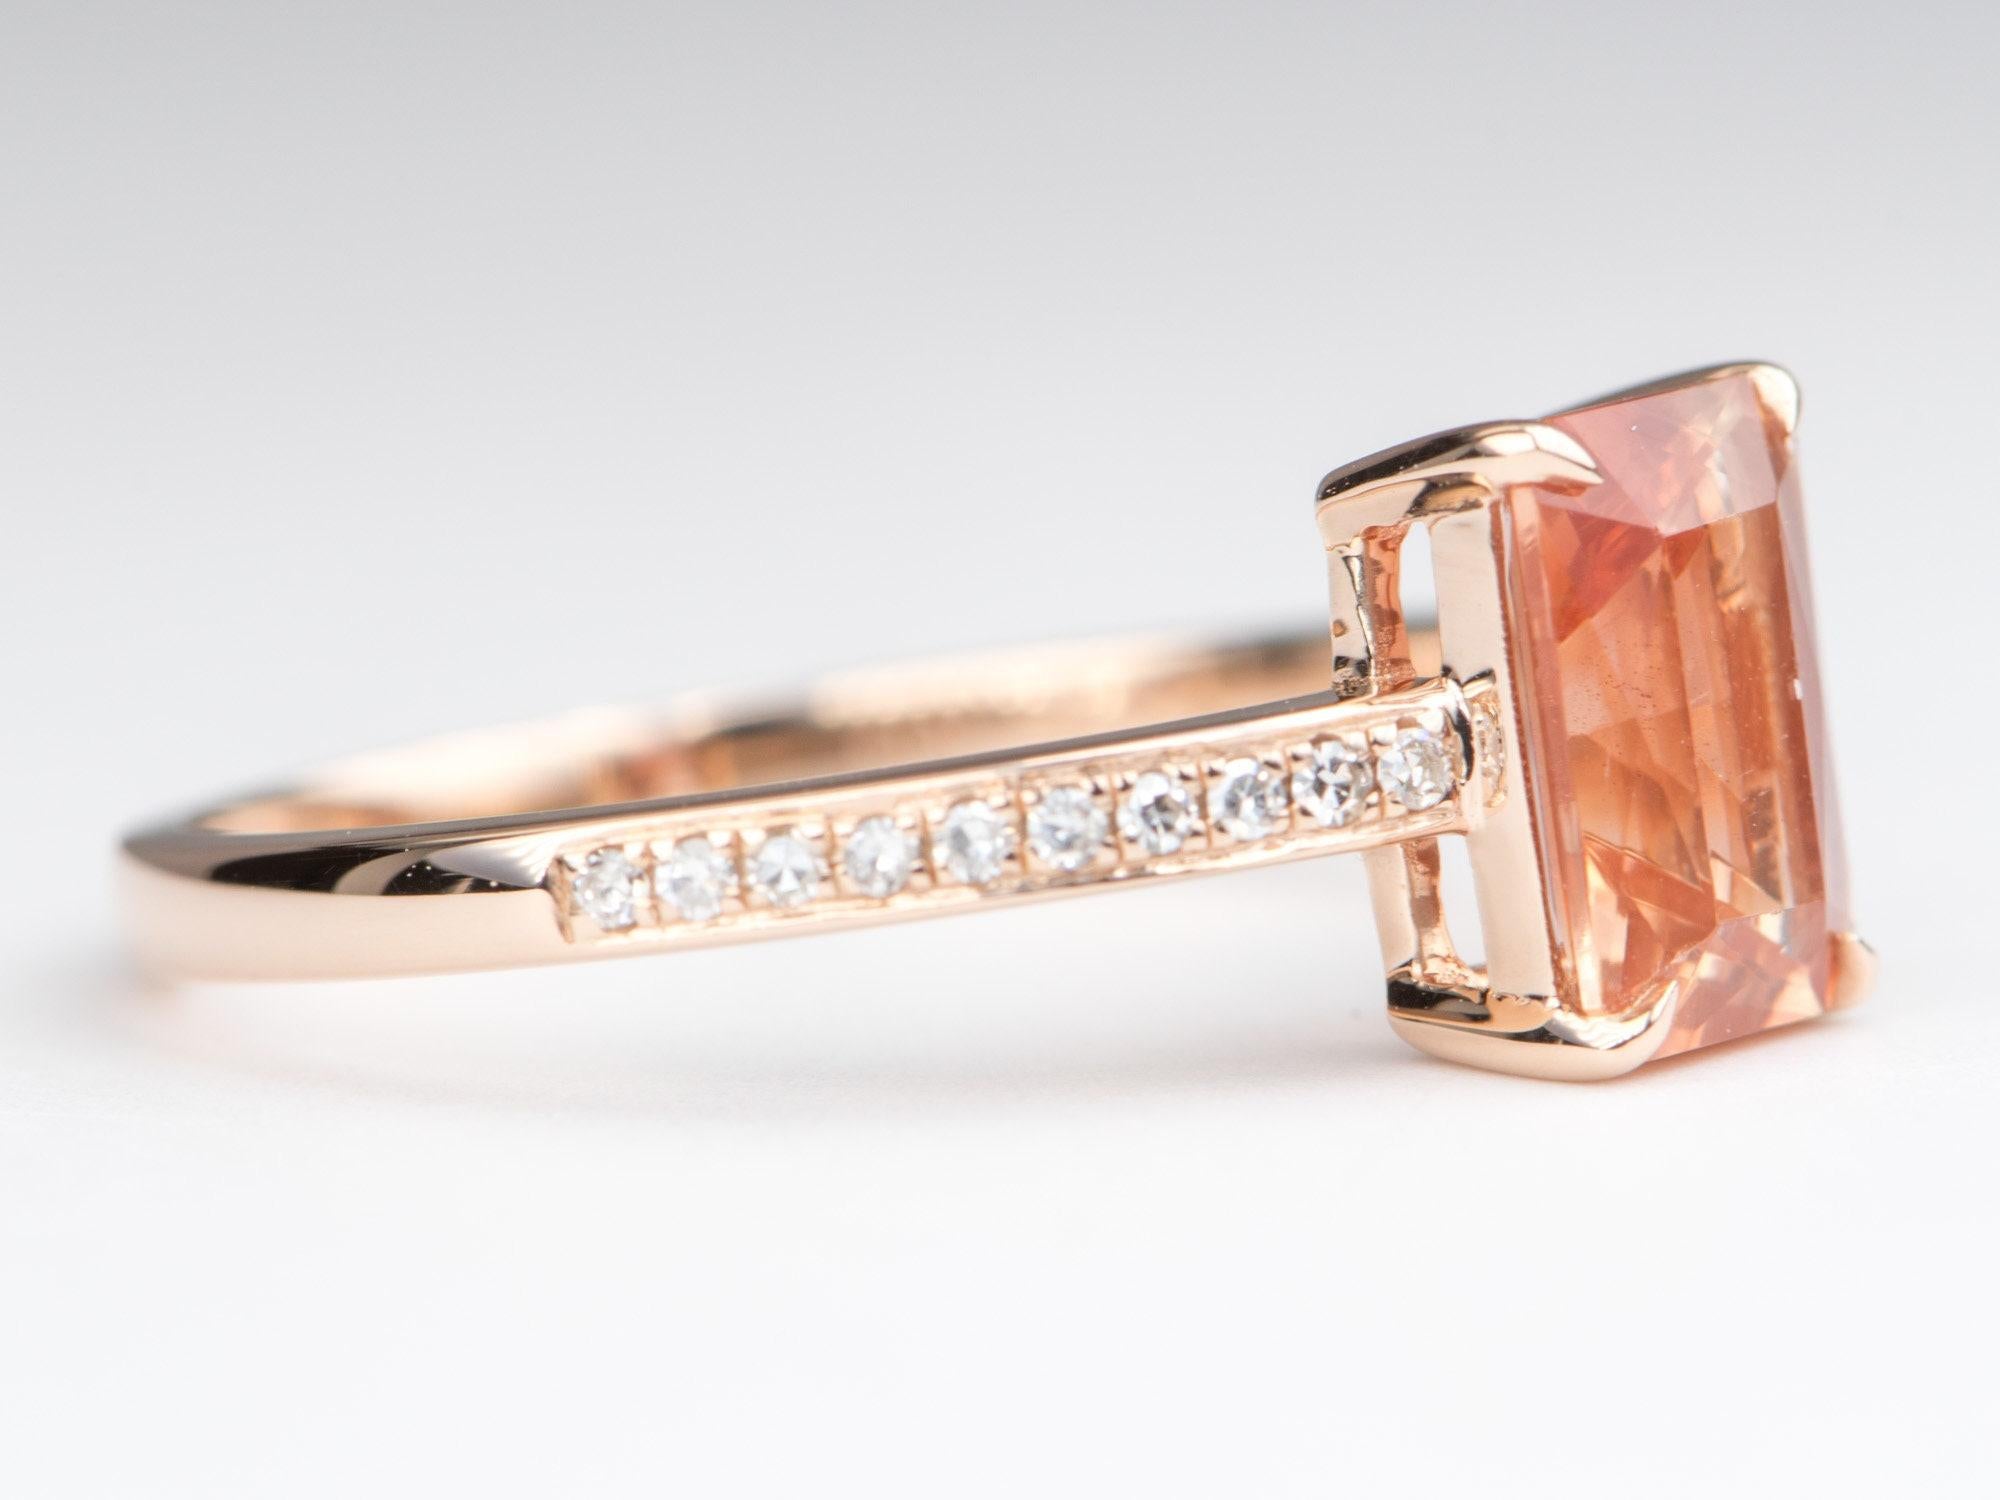 ♥ Solid 14K rose gold ring set with an rectangle-shaped reddish orange Oregon sunstone in the center with a diamond pave band
♥ The overall setting measures 6.2mm wide, 8.1mm in length, and sits 4.2mm tall from the finger

♥ Ring size: US Size 7